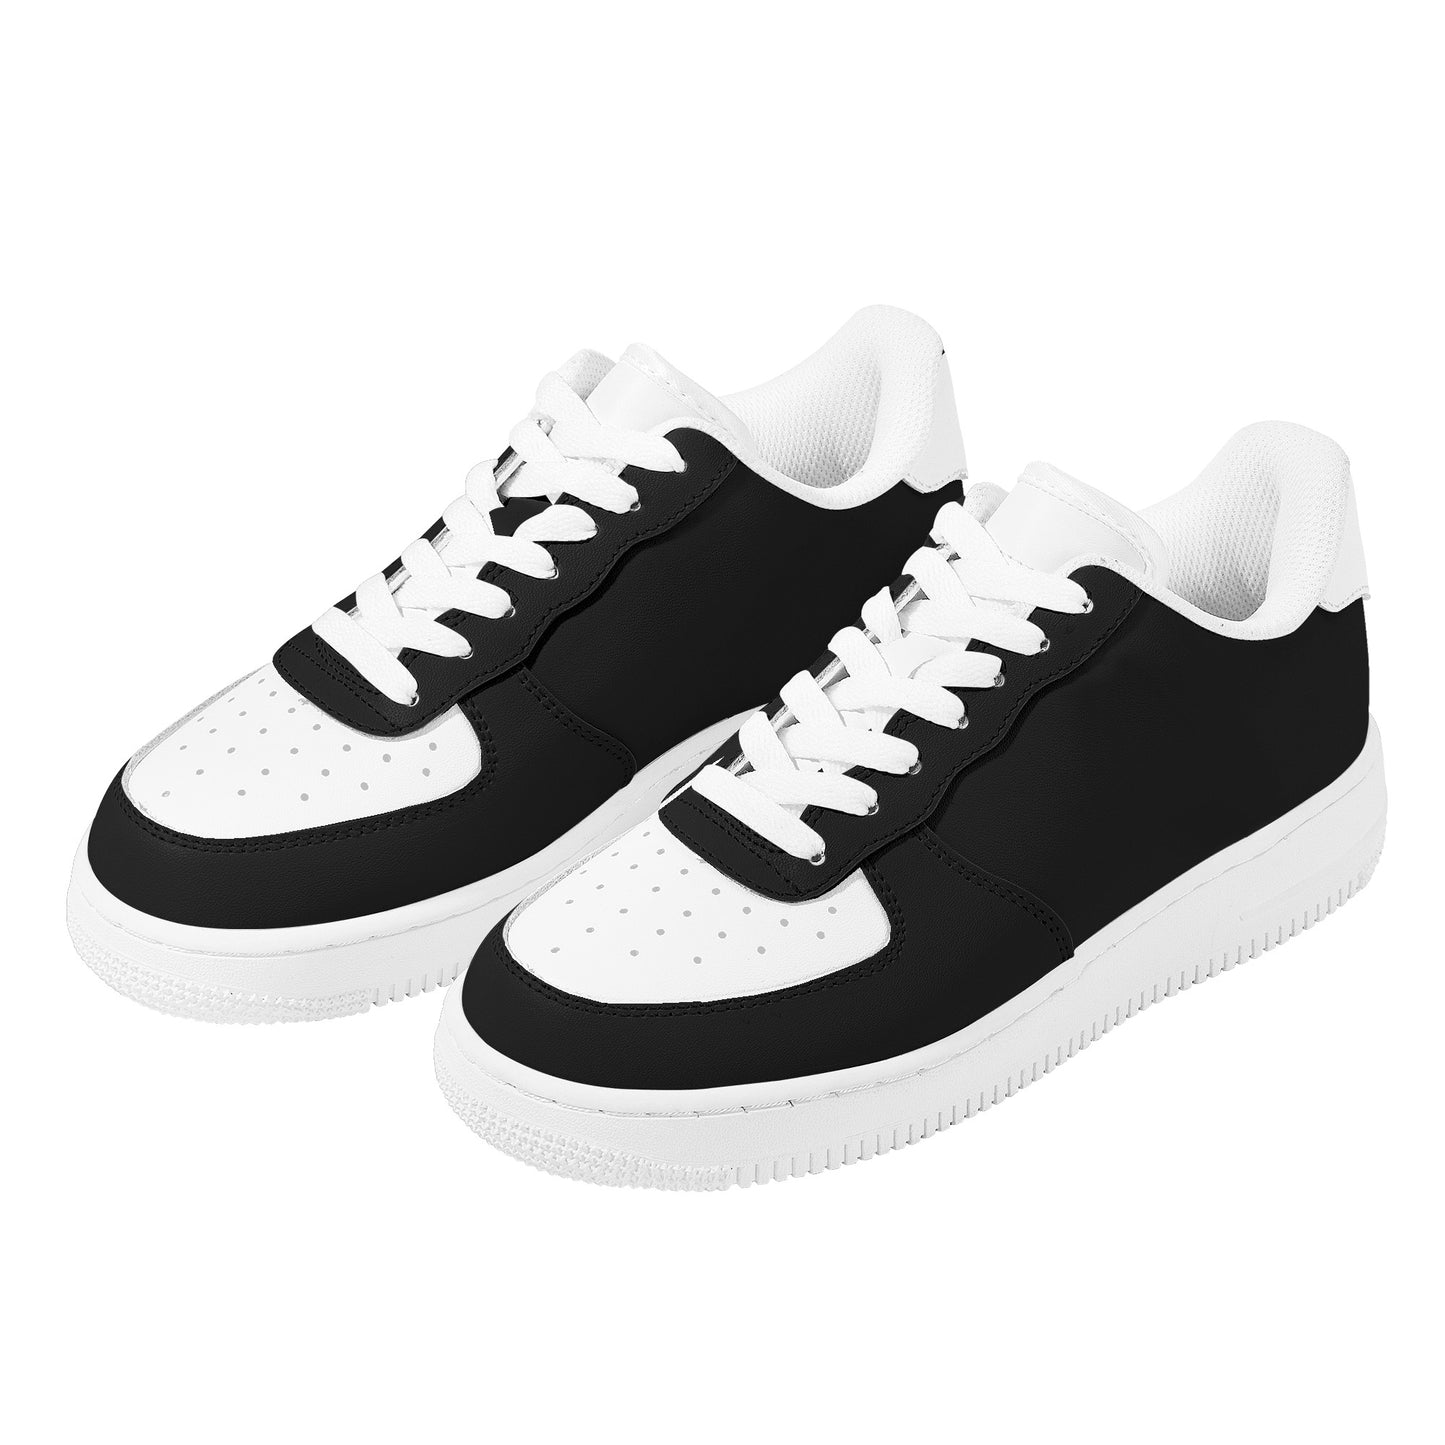 Black and White Men Vegan Leather Shoes, Sneakers Low Top Lace Up Custom Designer Flat Casual Designer Handmade Trainers Starcove Fashion